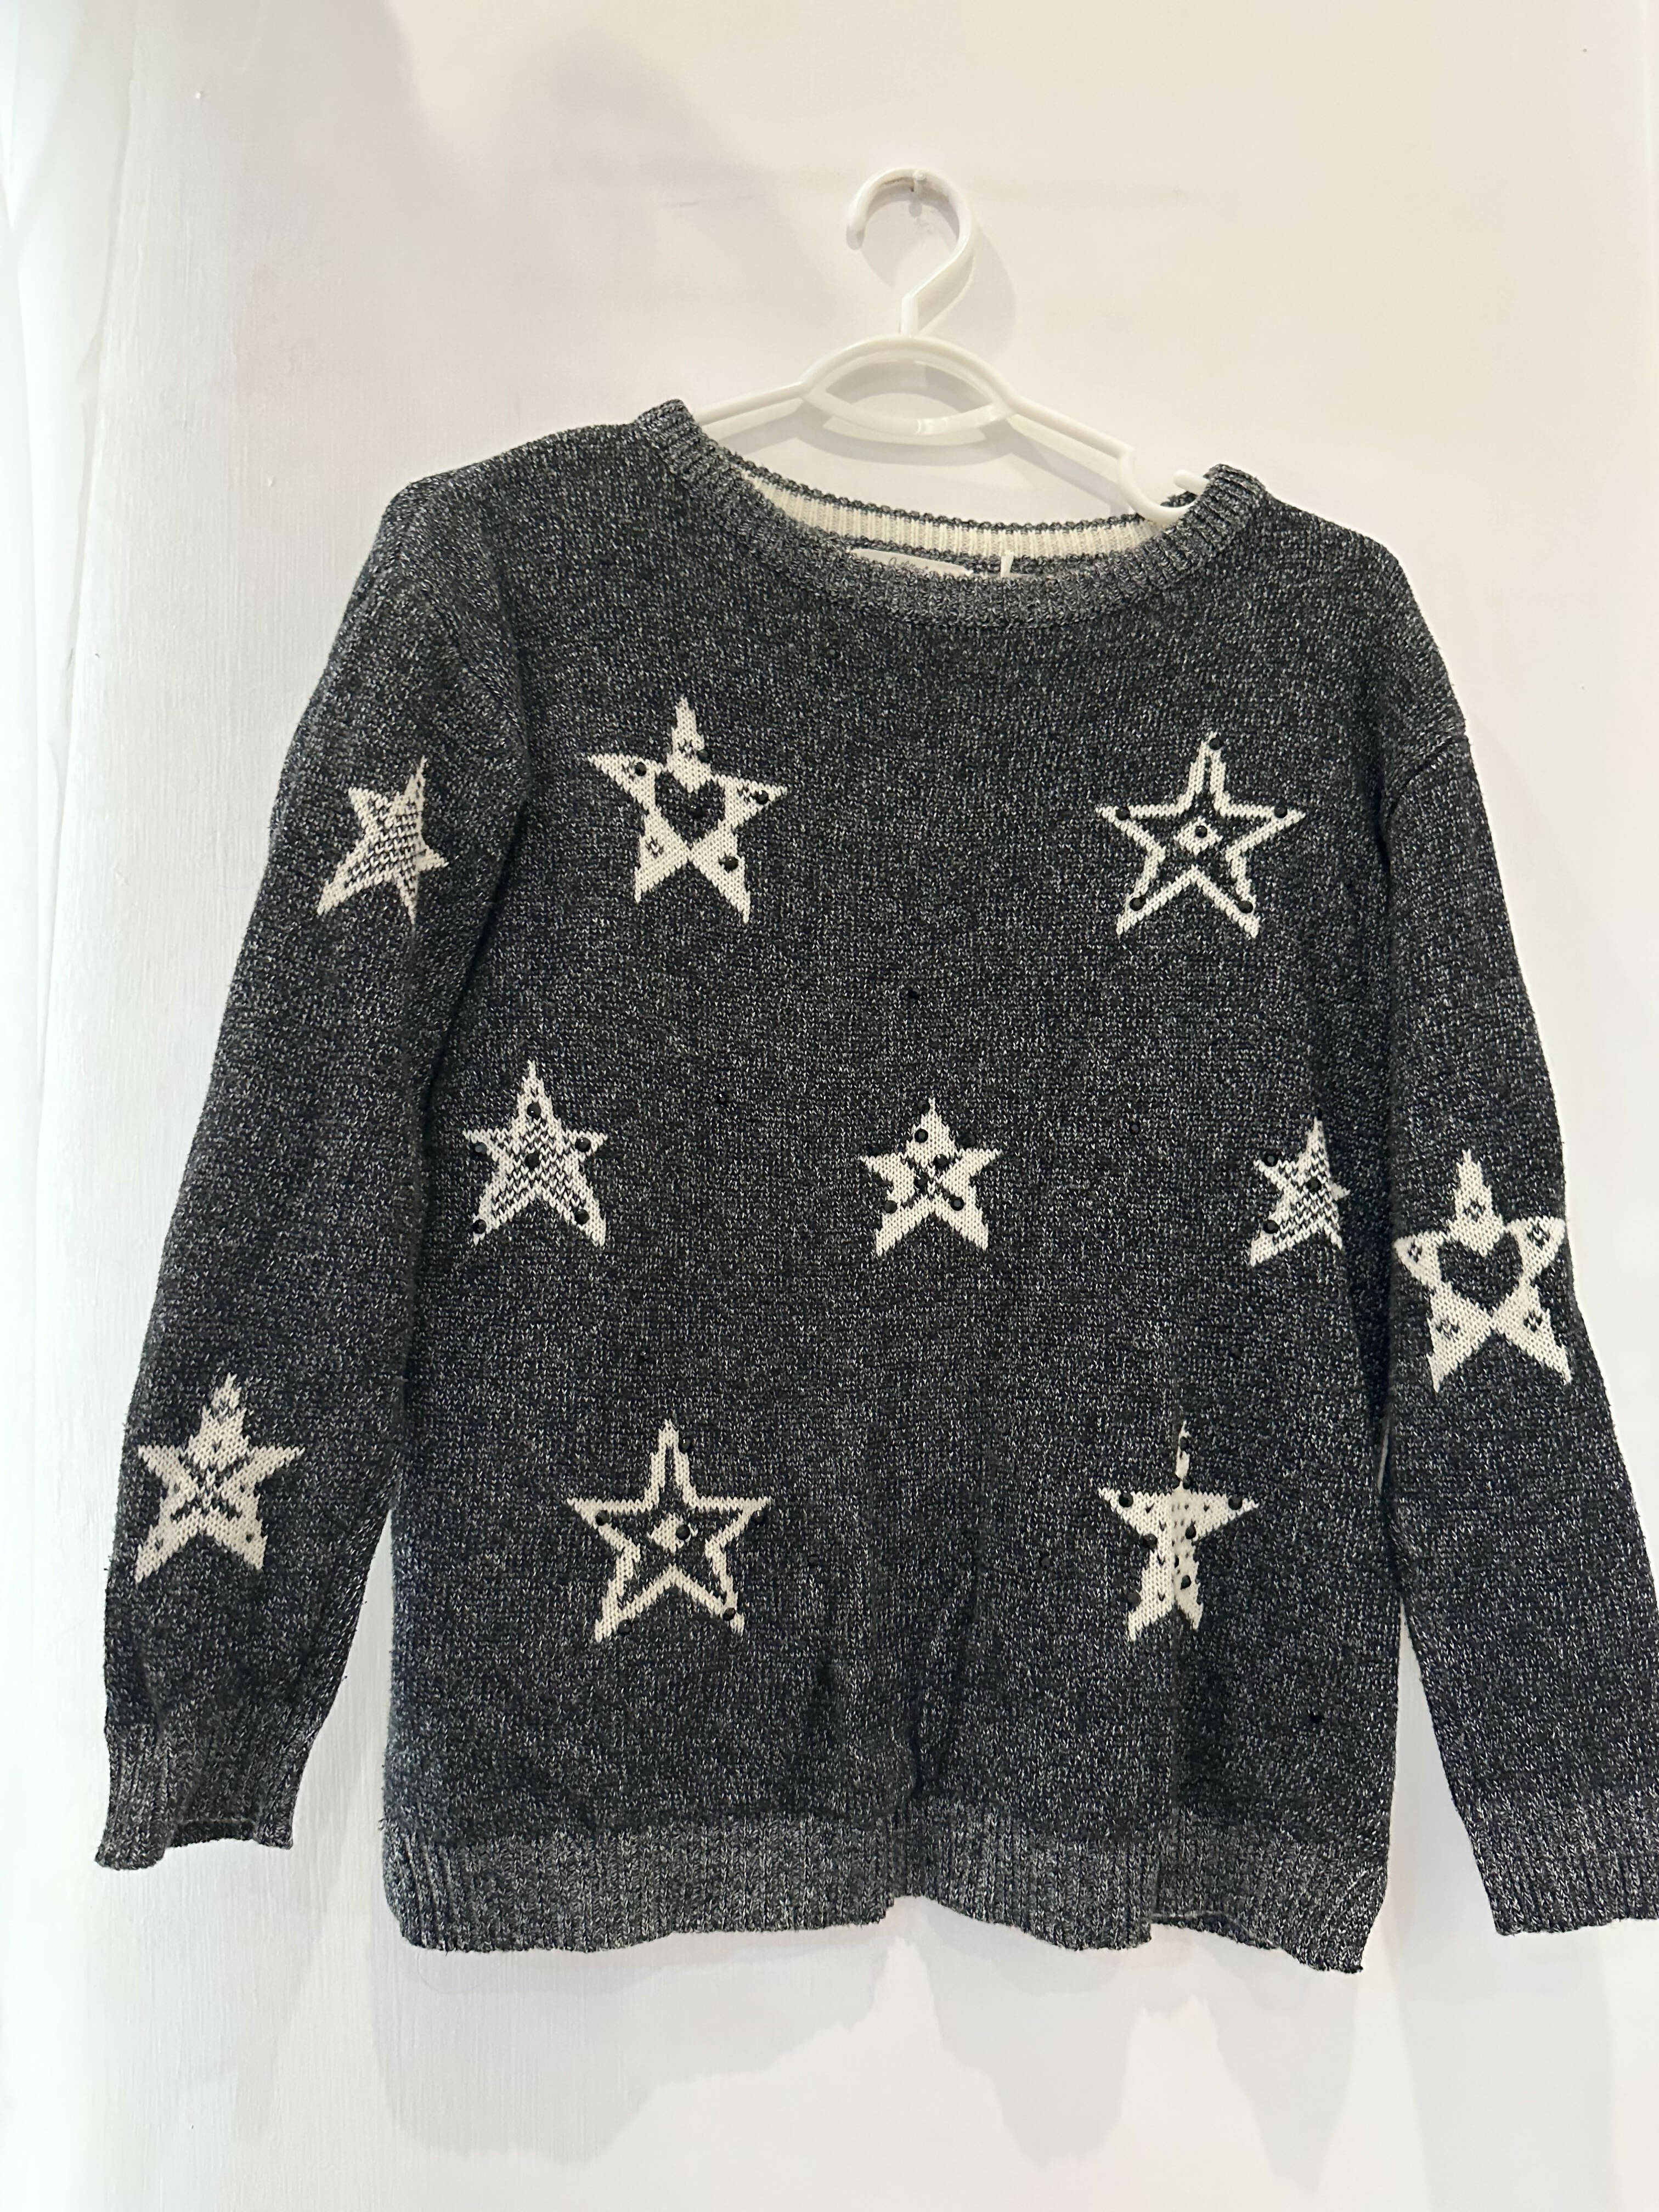 Outfitters | Girls Knit wear Sweater | Women Tops & Shirts | Sweaters | Small | Preloved